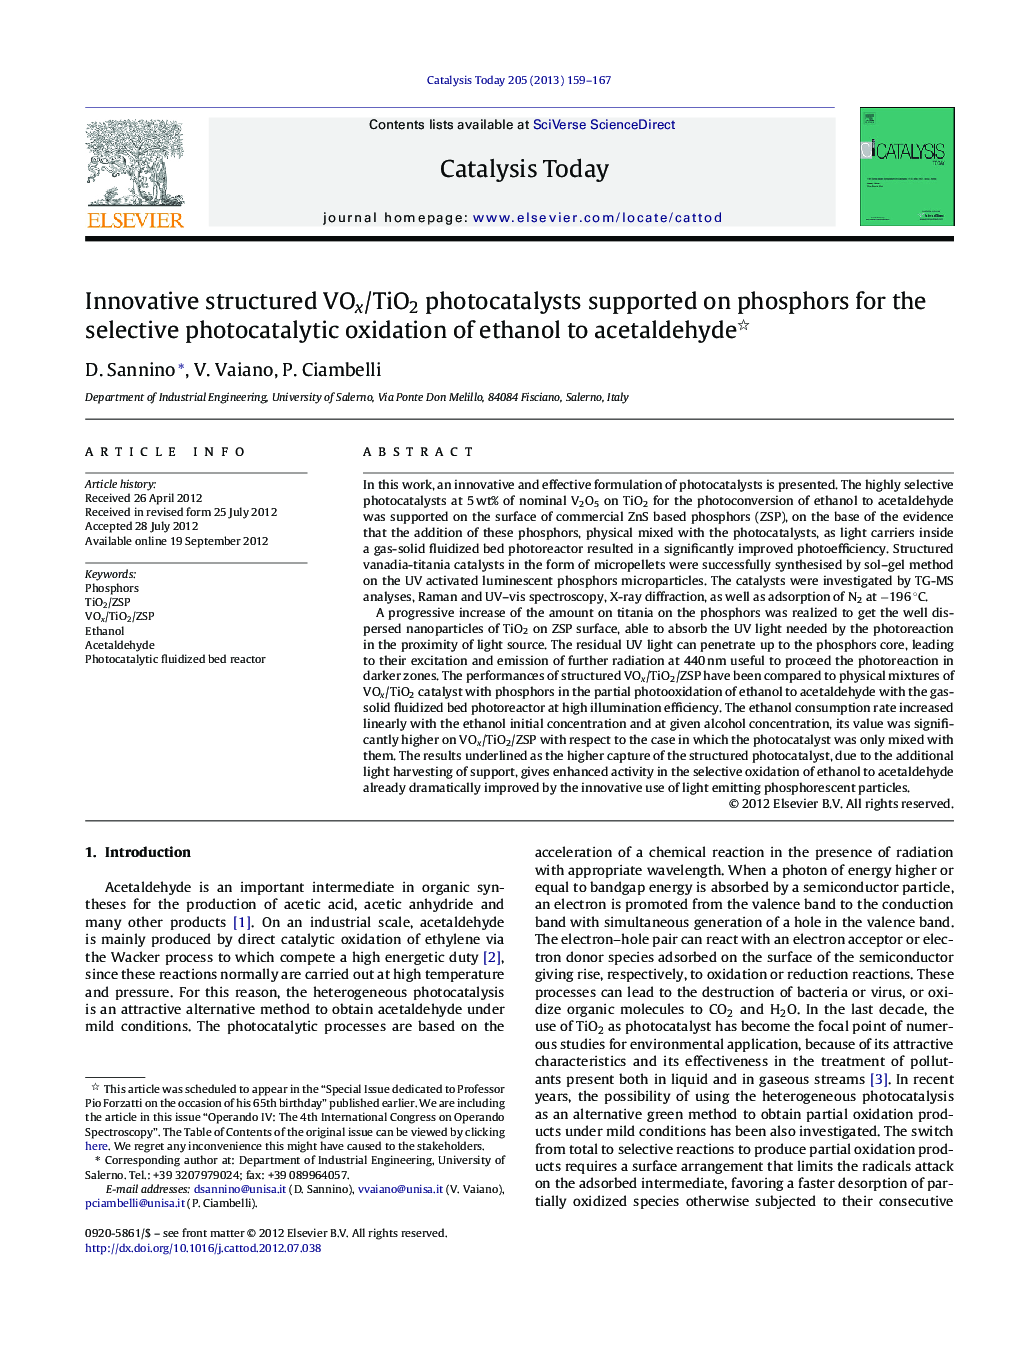 Innovative structured VOx/TiO2 photocatalysts supported on phosphors for the selective photocatalytic oxidation of ethanol to acetaldehyde 